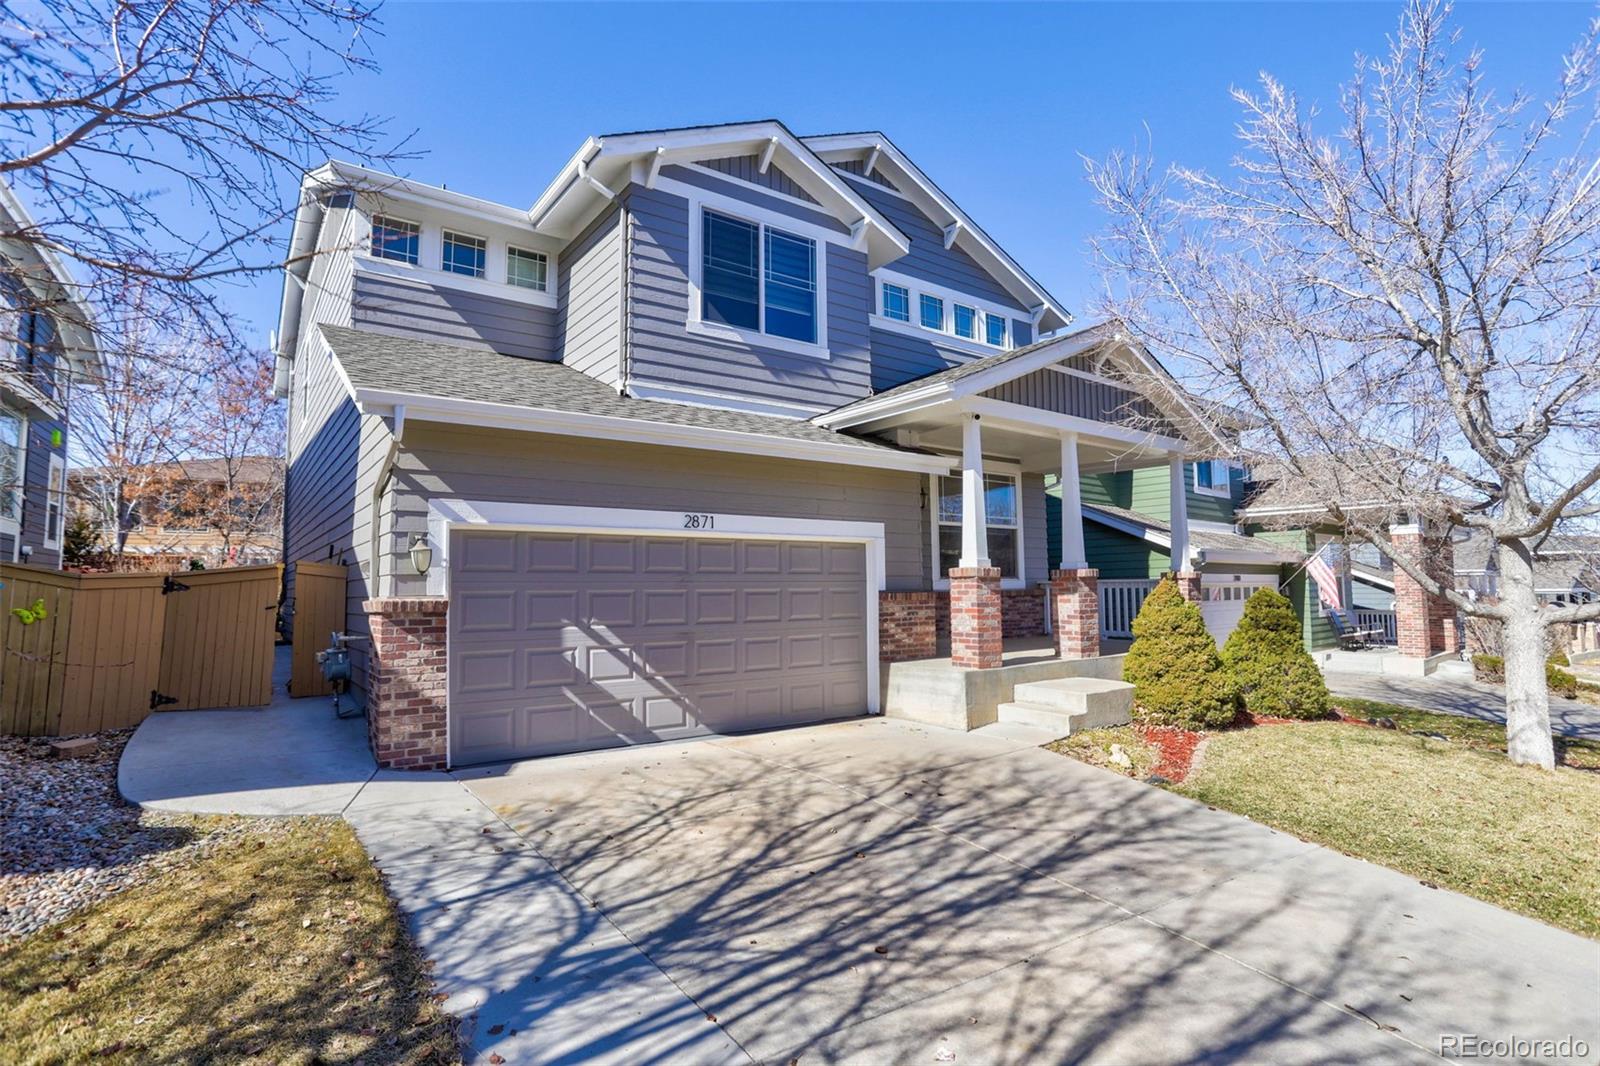 Report Image for 2871  Windridge Circle,Highlands Ranch, Colorado